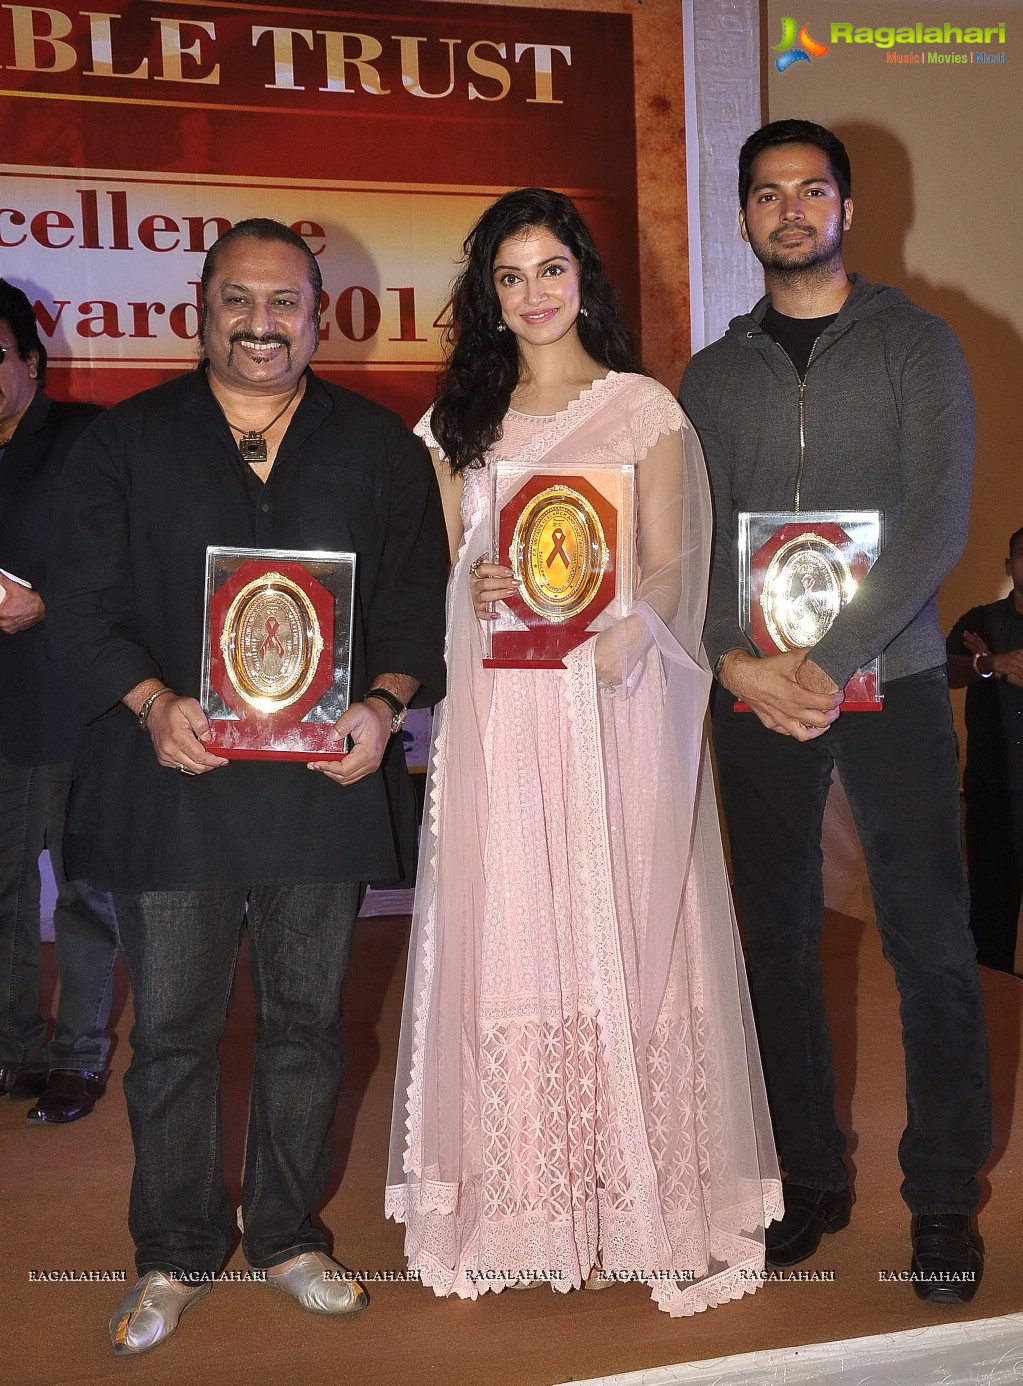 10th Excellence National Best Debutante Awards 2014 by Toronto Productions Pvt Ltd